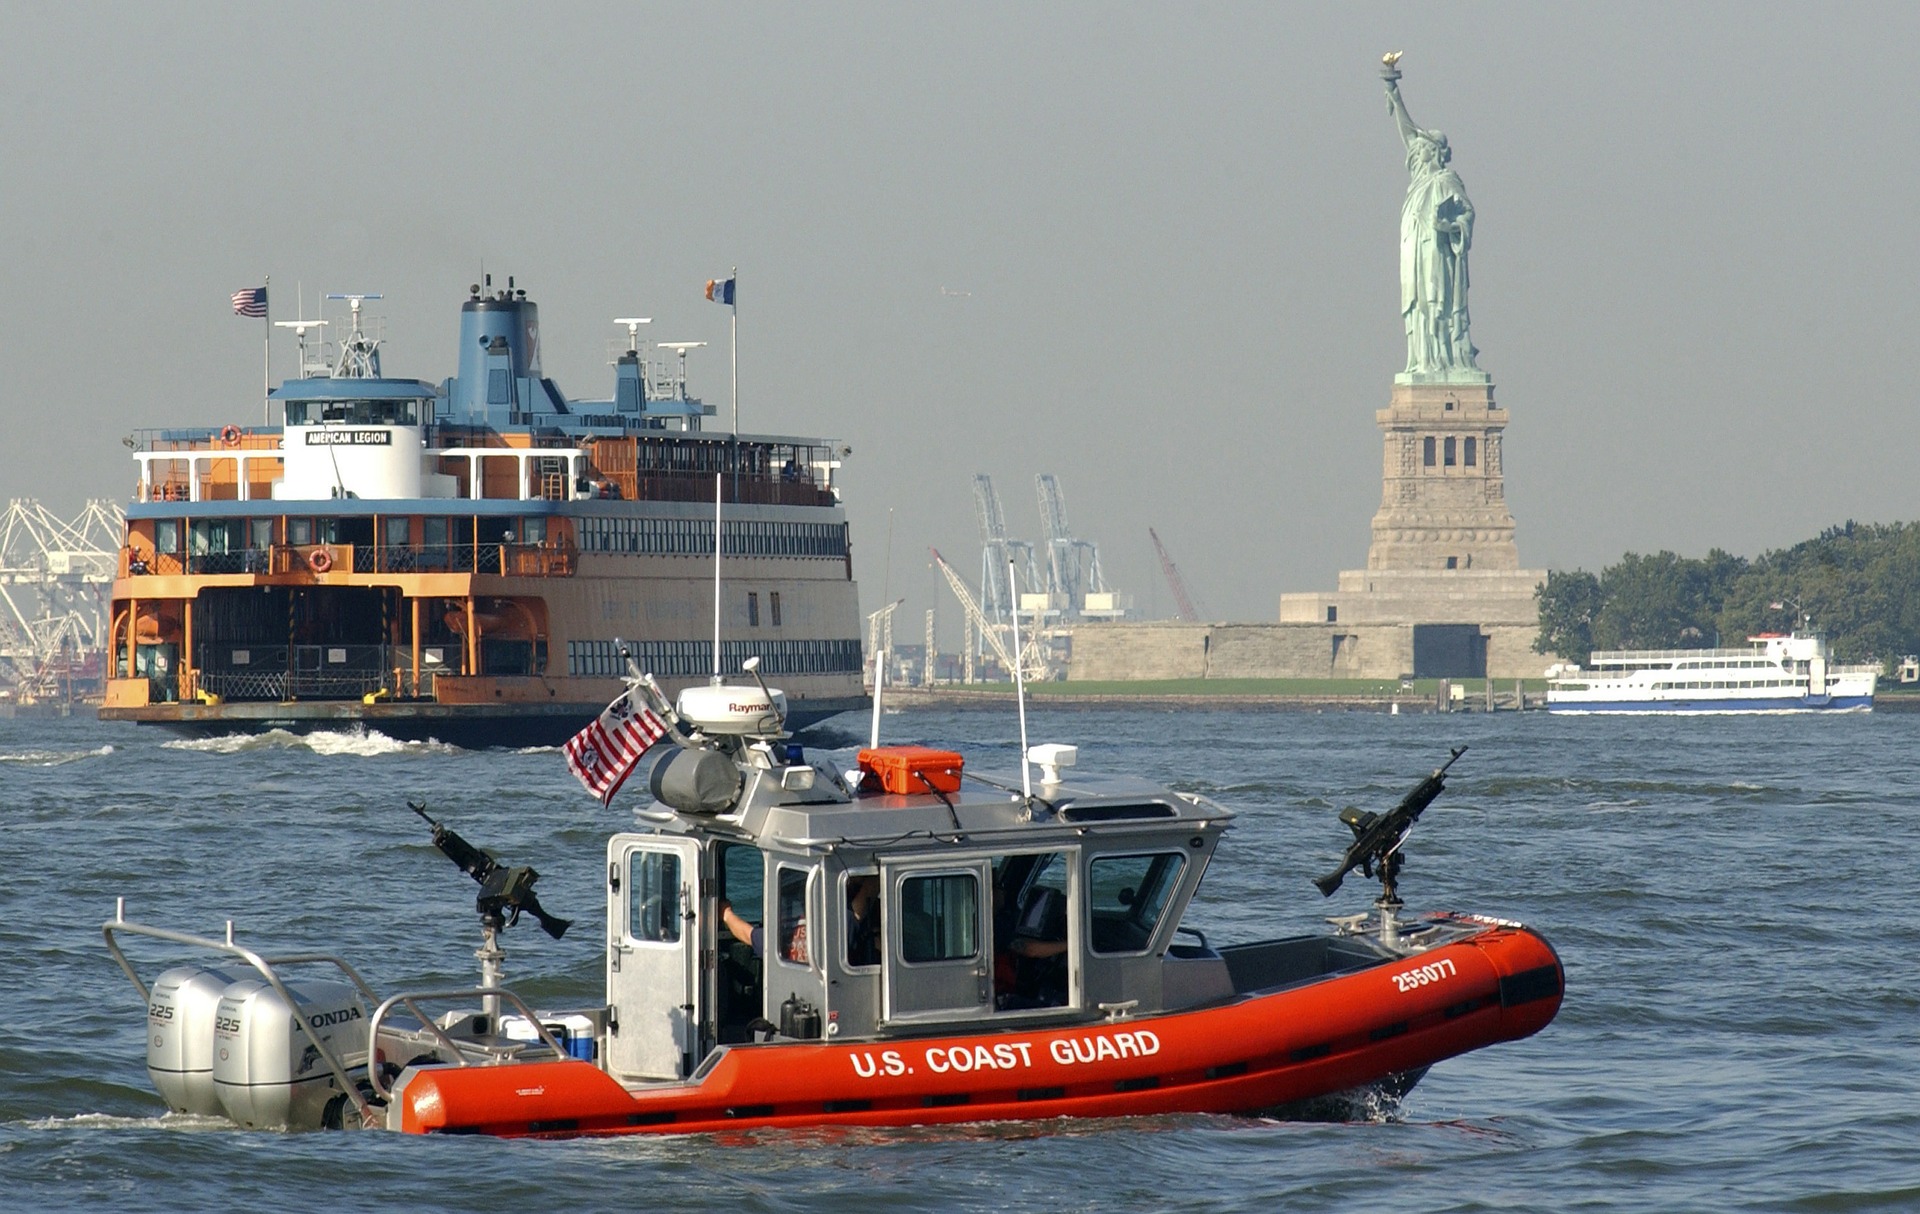 Statue of Liberty in New York Bay with ferries crossing and a US Coast Guard on Stand By.